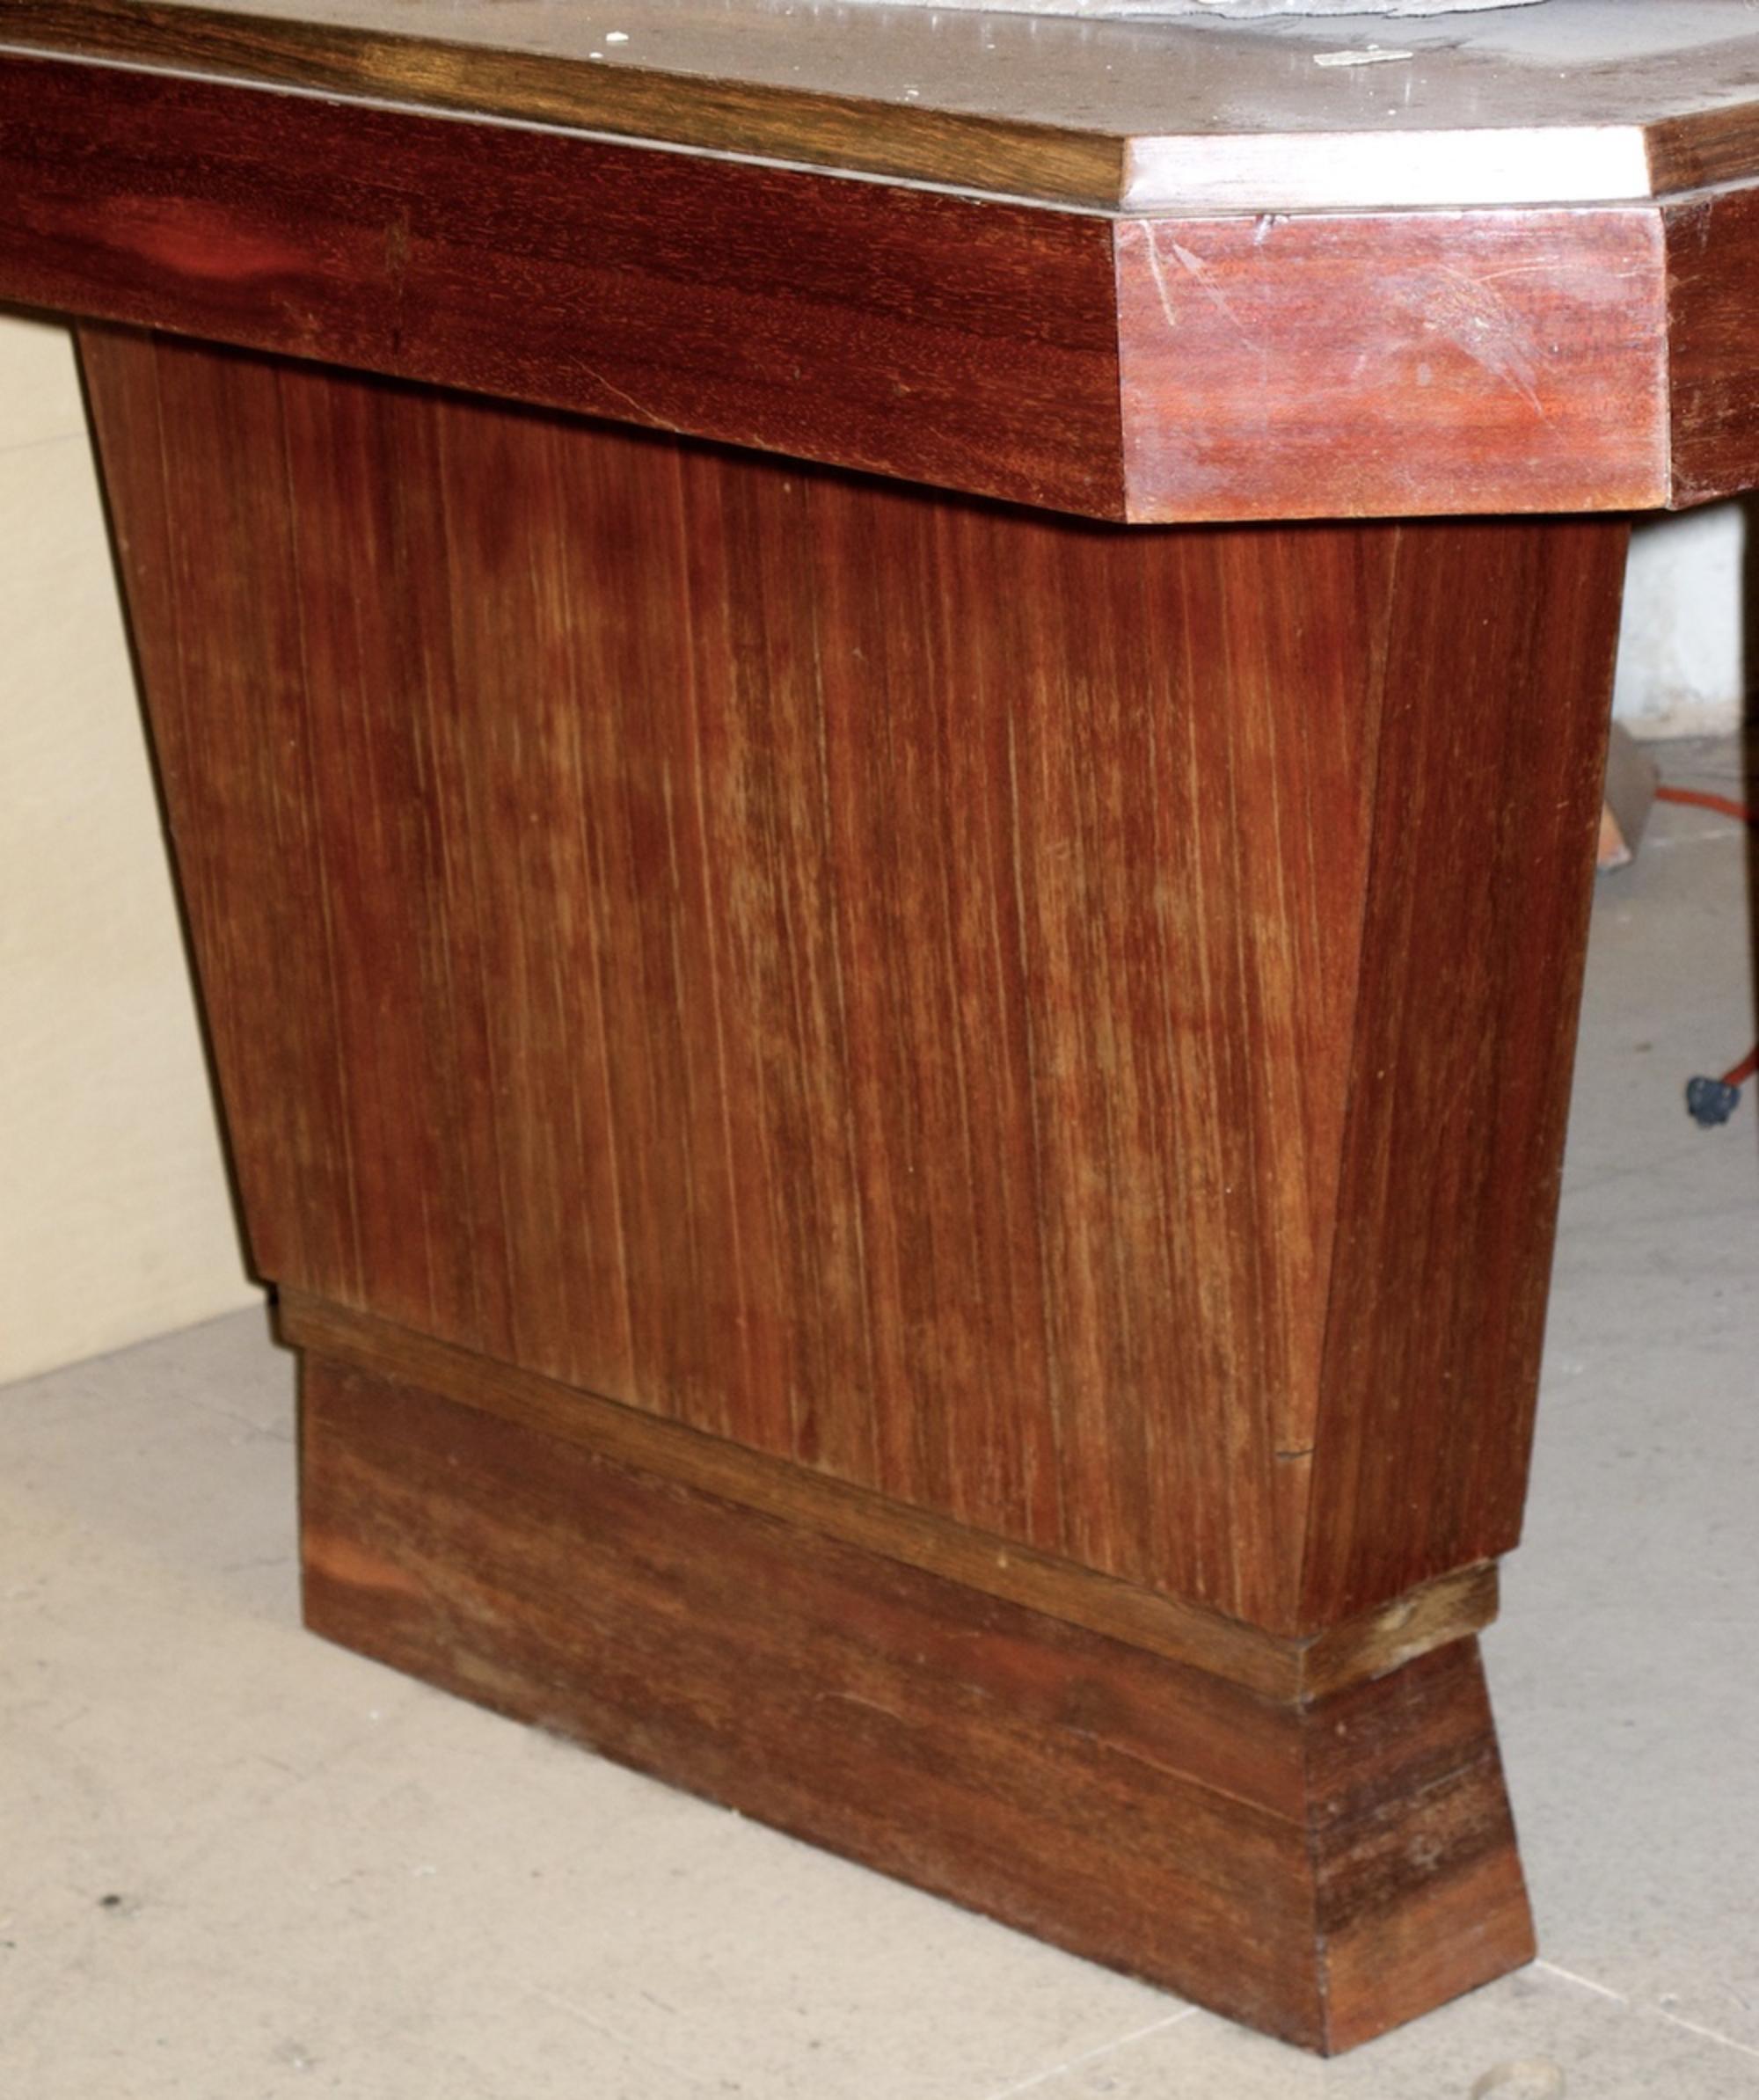 French Modernist Art Deco dining table by DIM (Joubert et Petit) in rosewood, circa 1928. 47